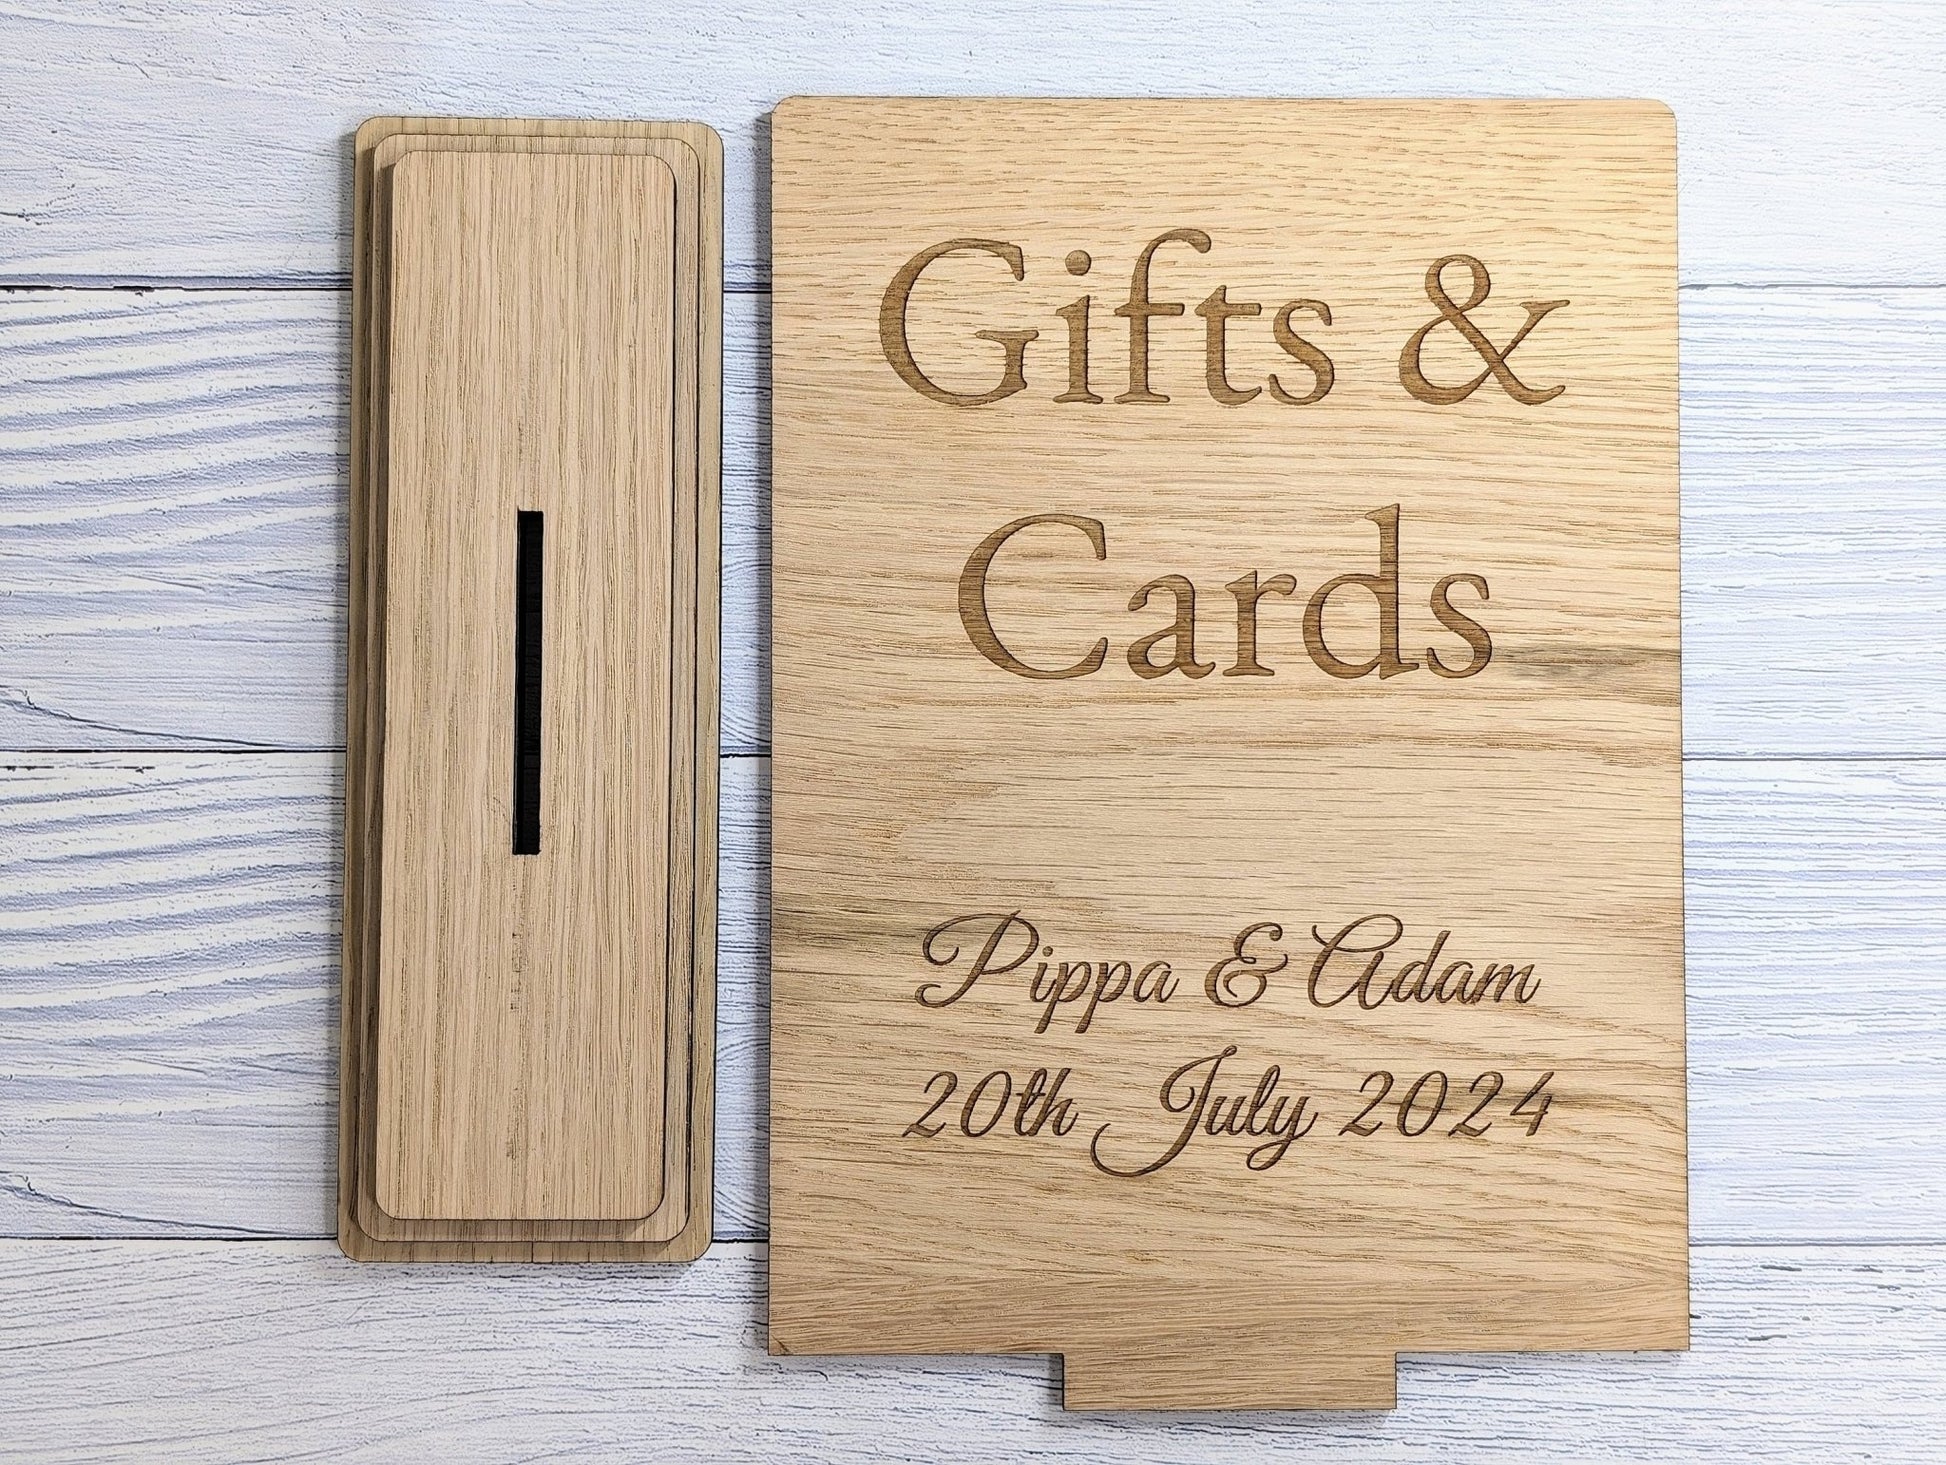 Personalised 'Gifts & Cards' XL Wooden Sign for Weddings and Parties - Extra Large Freestanding Table Display with Couple's Name and Date - CherryGroveCraft